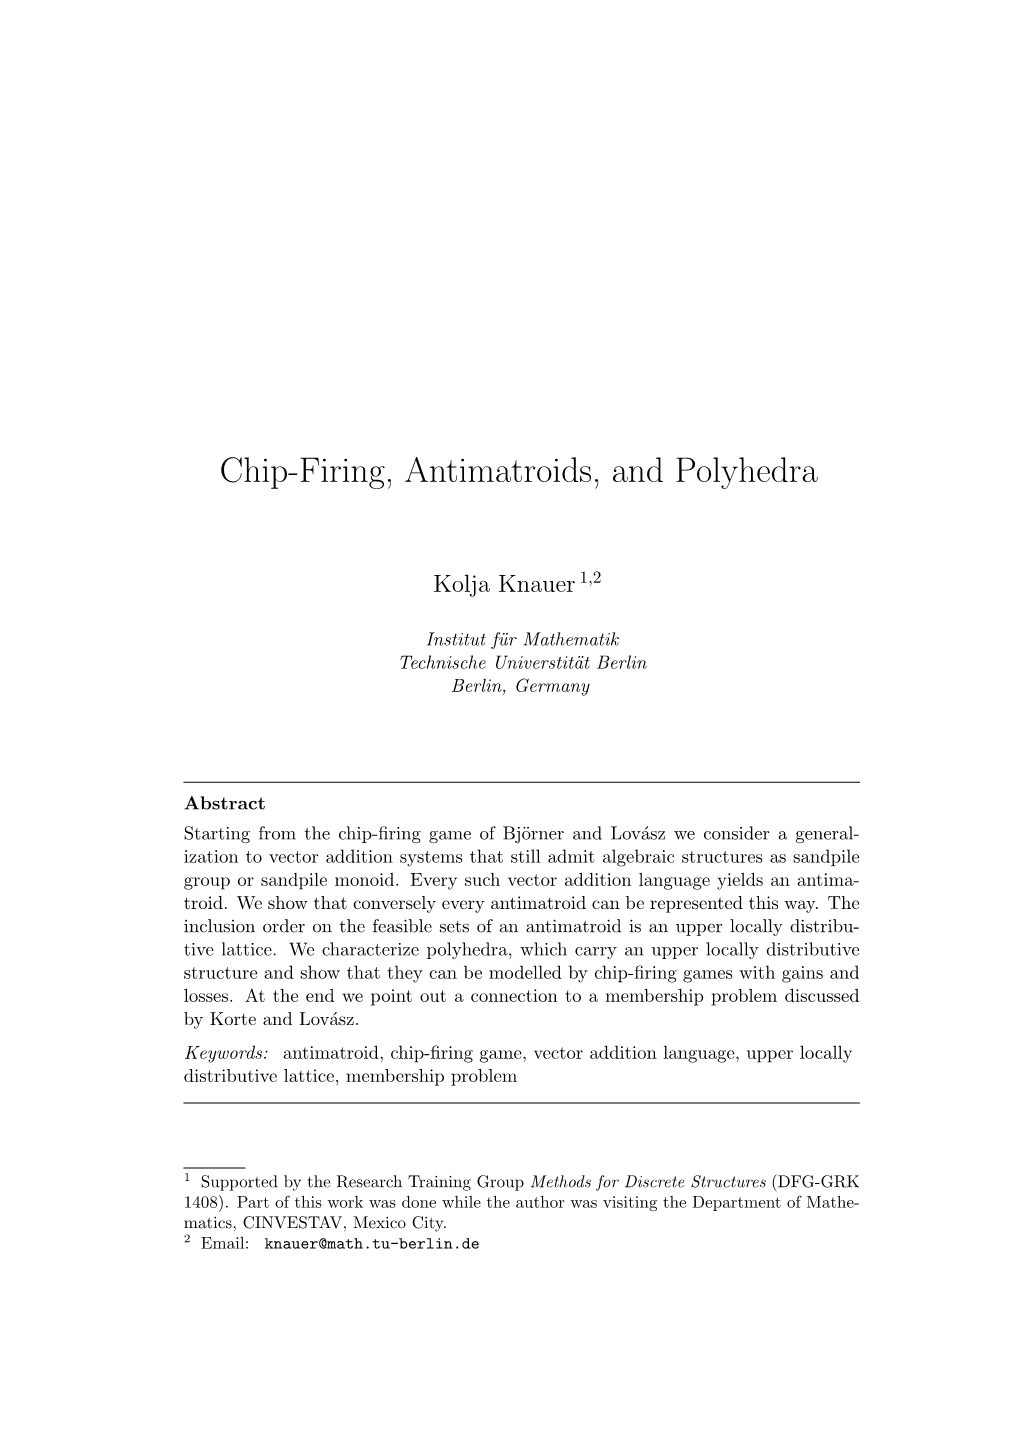 Chip-Firing, Antimatroids, and Polyhedra